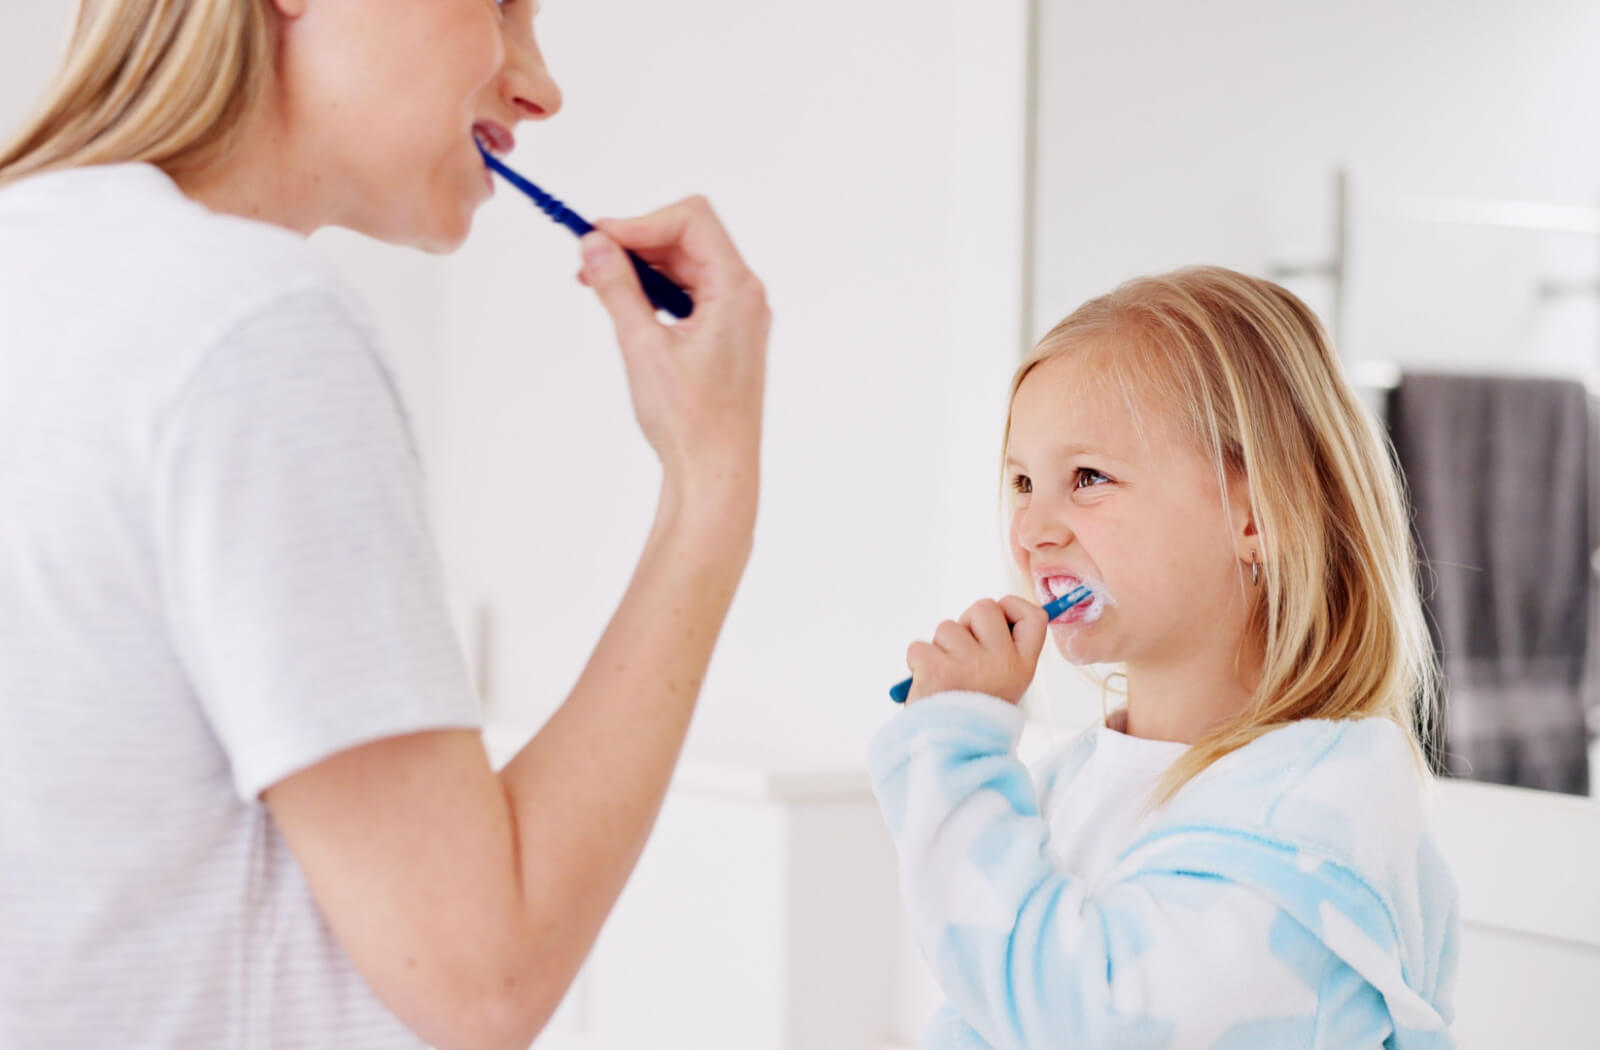 A mother teaching her young girl to brush her teeth in the bathroom.